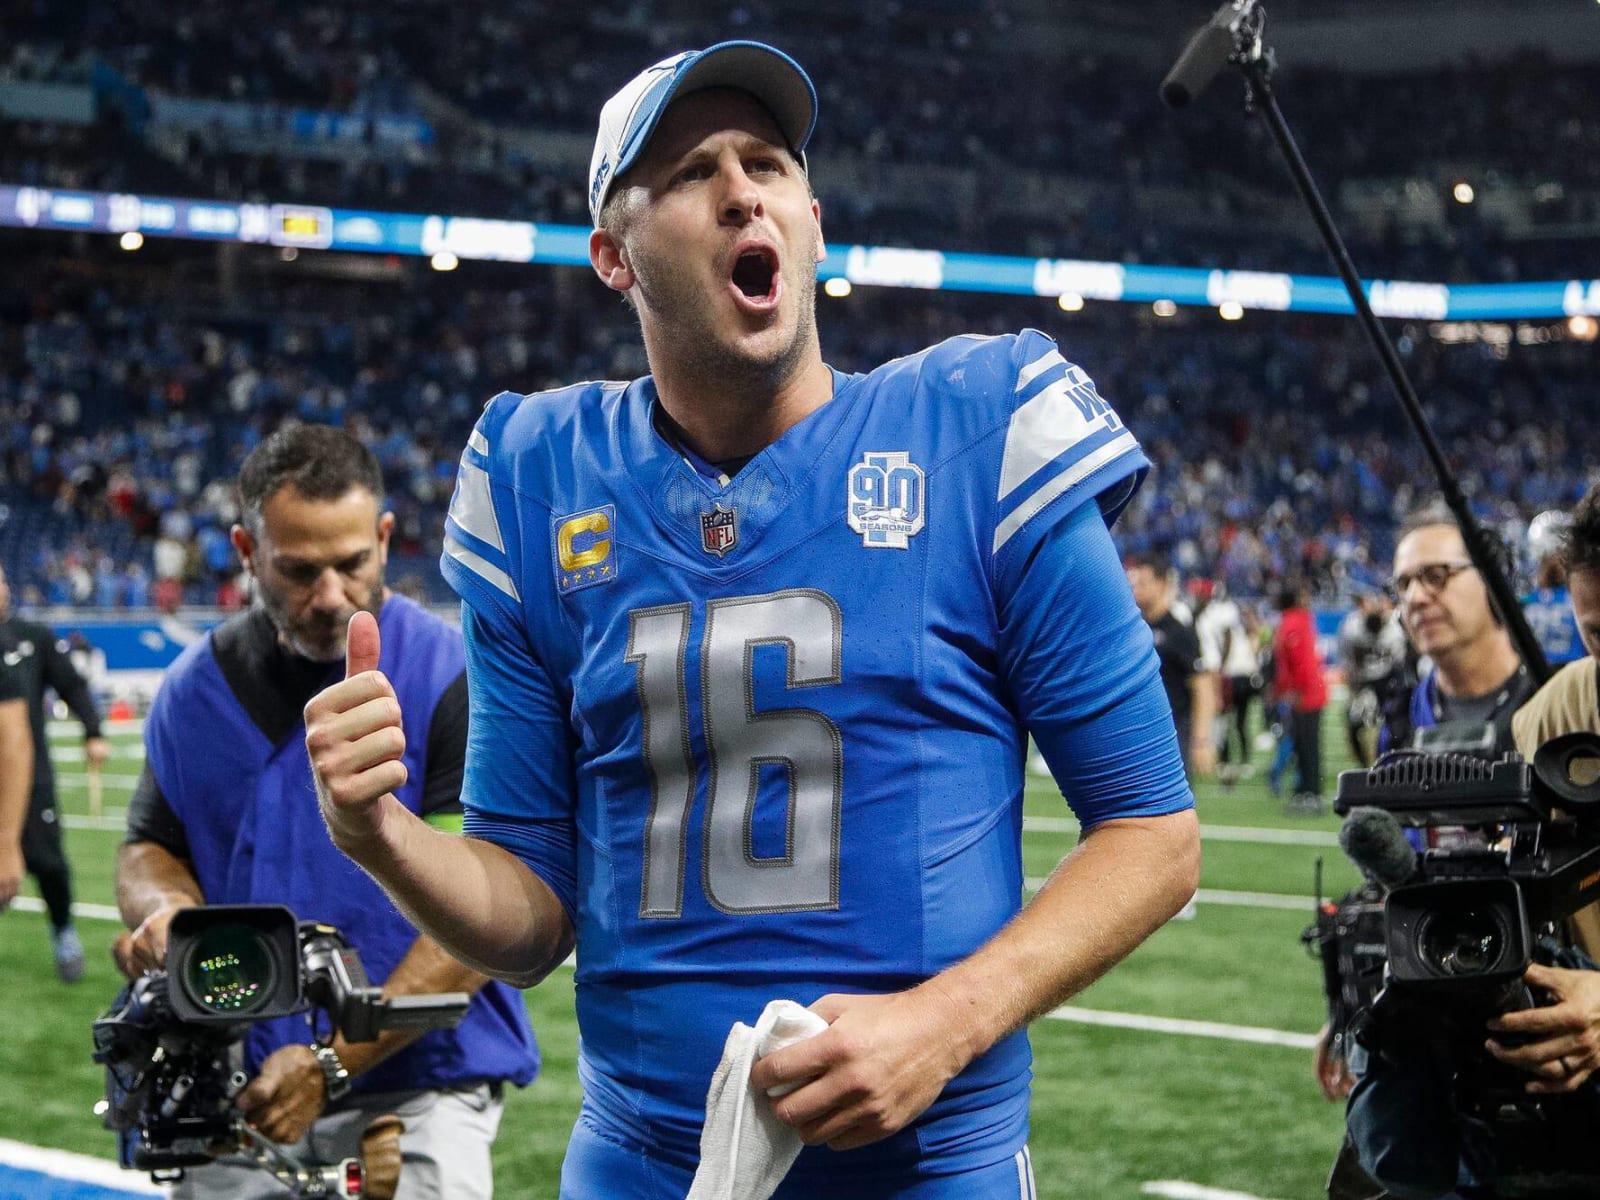  Jared Goff Turns the Tide How the Unexpected Star is Reviving Detroit Lions' Football Dreams---